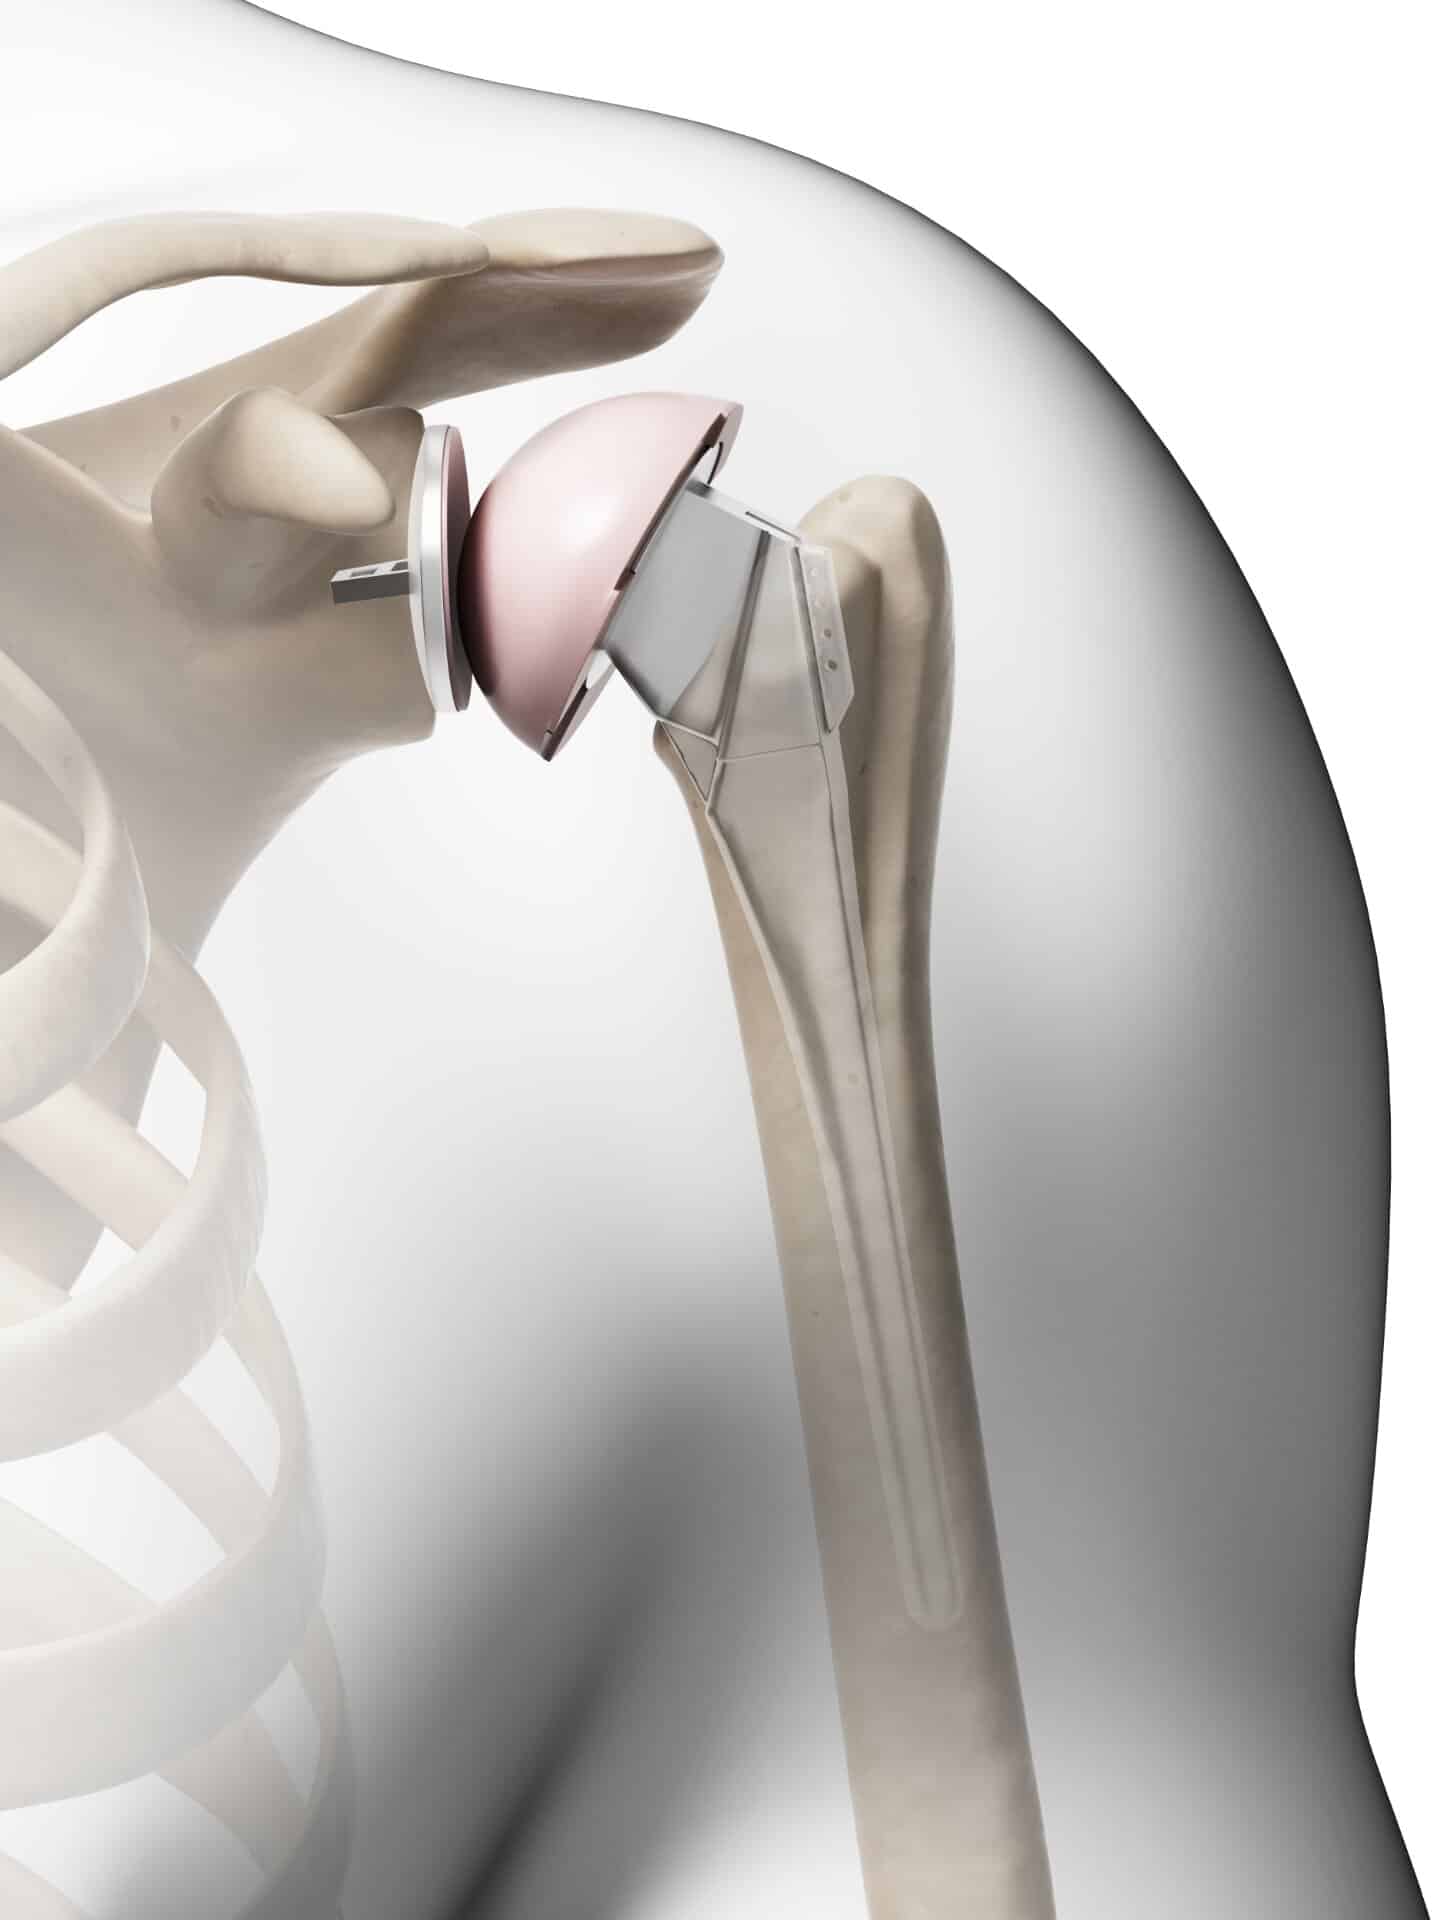 New Shoulder Replacement Joint